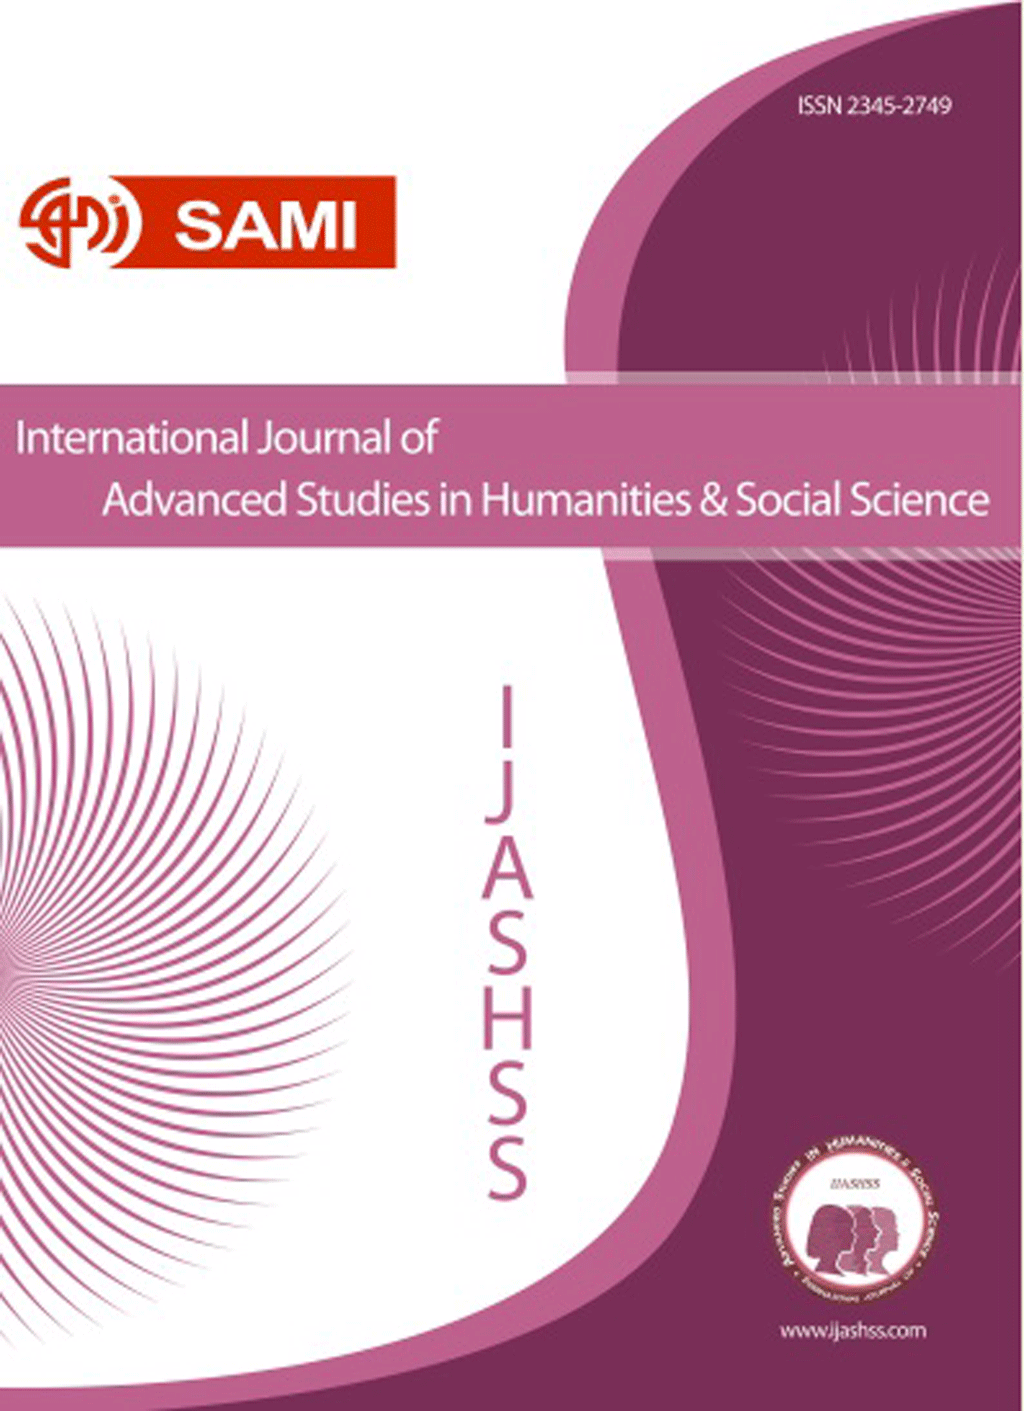 International Journal of Advanced Studies in Humanities and Social Science - April 2019, Volume 8 - Issue 2